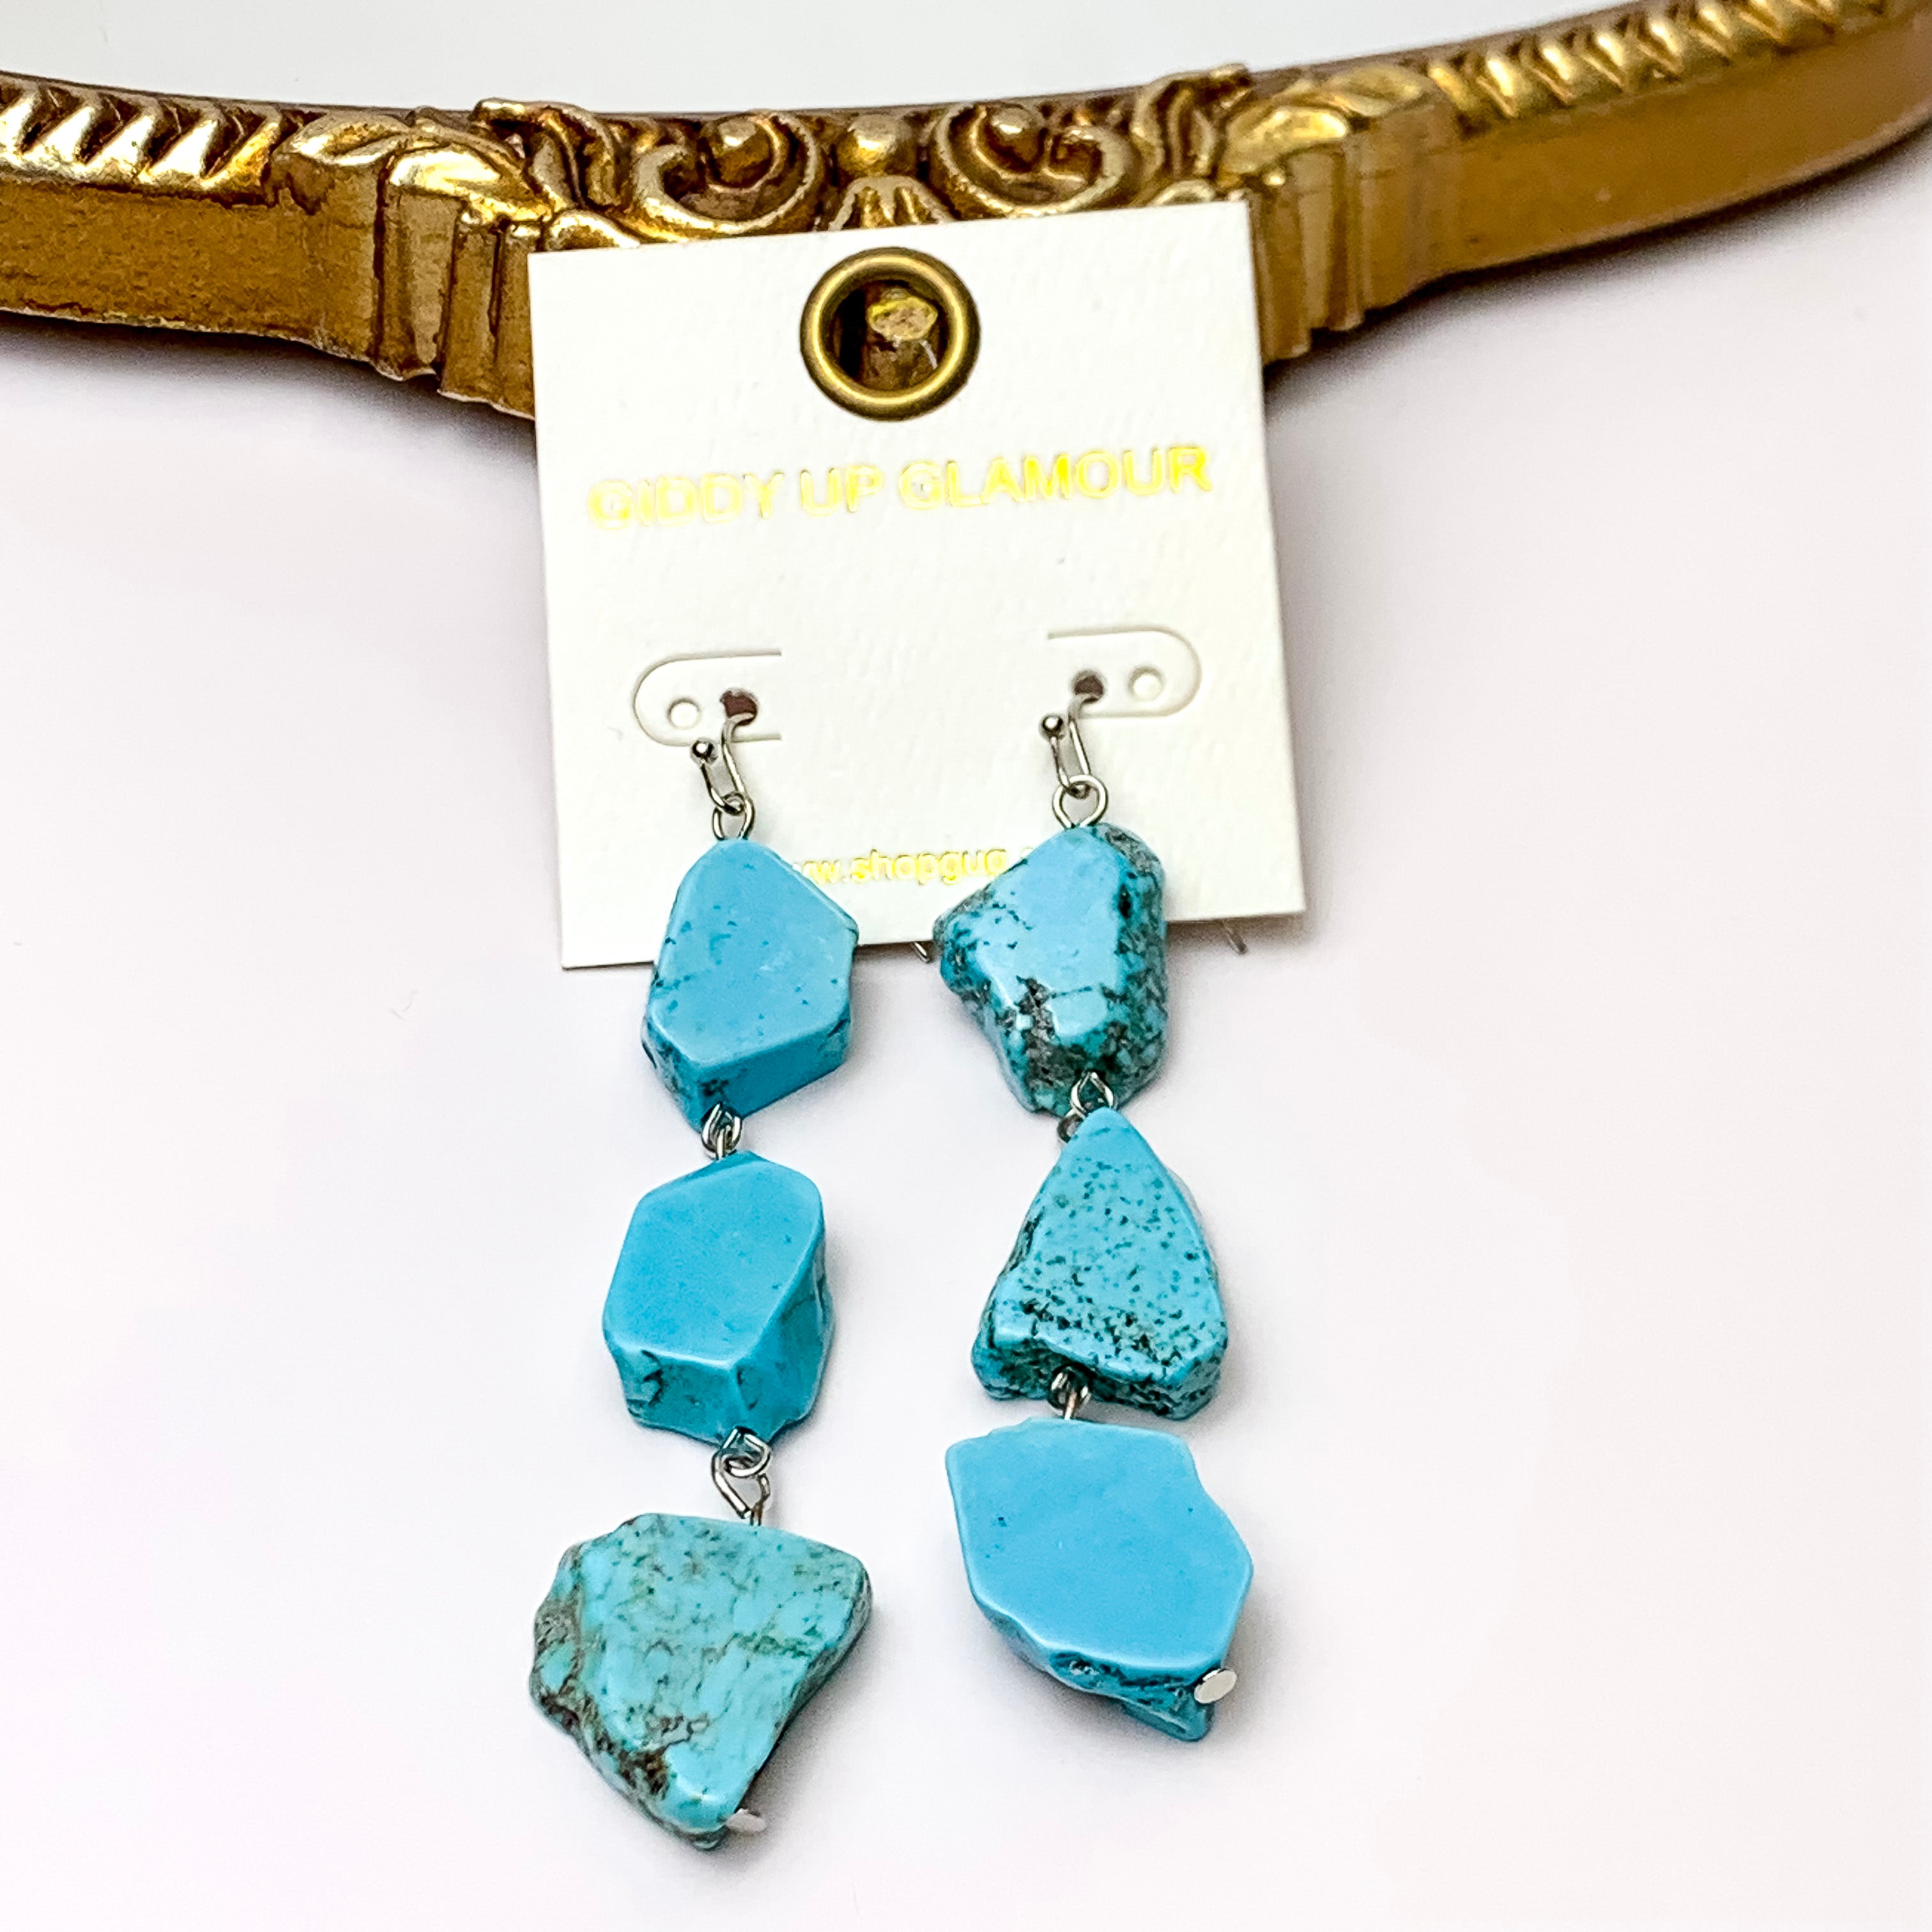 3 Tier Faux Turquoise Slab Drop Earrings - Giddy Up Glamour Boutique